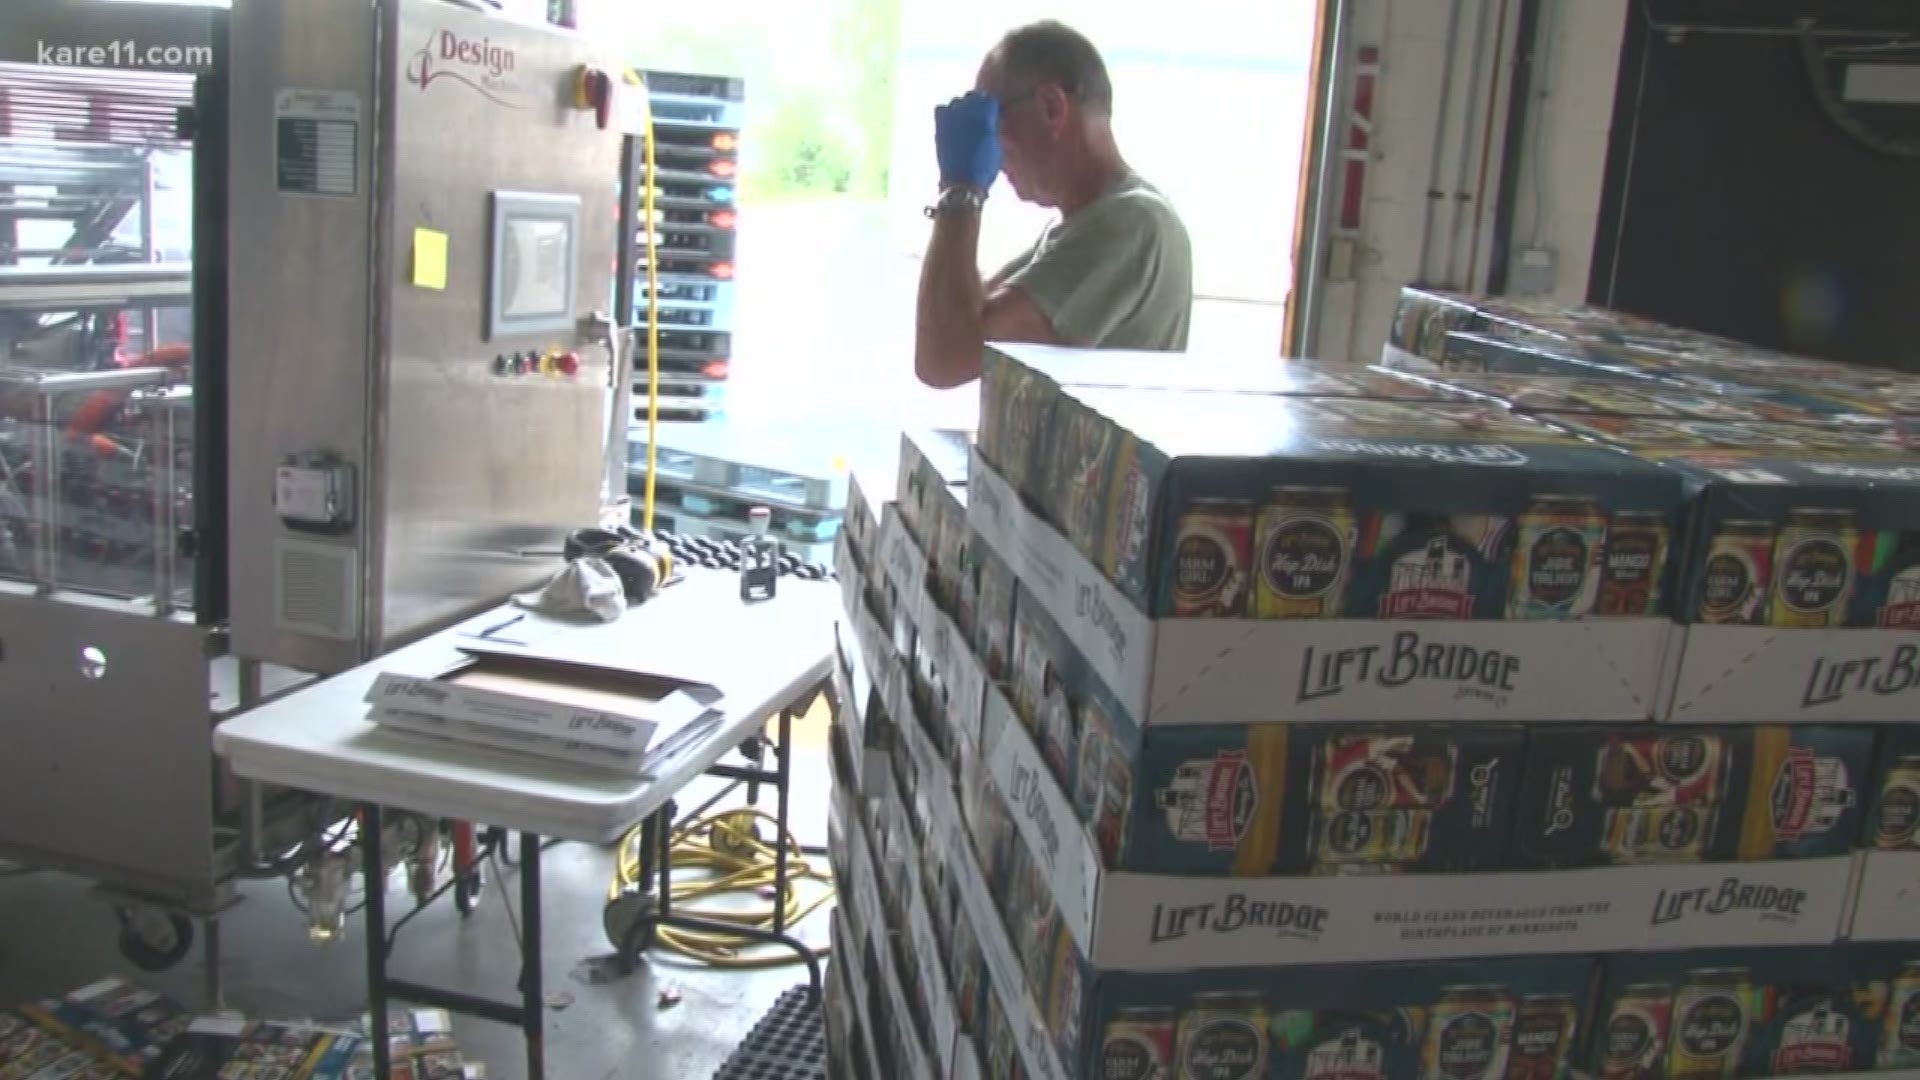 Minnesota law says once a brewery produces 20,000 barrels of beer a year, they can no longer sell off-sale beer.